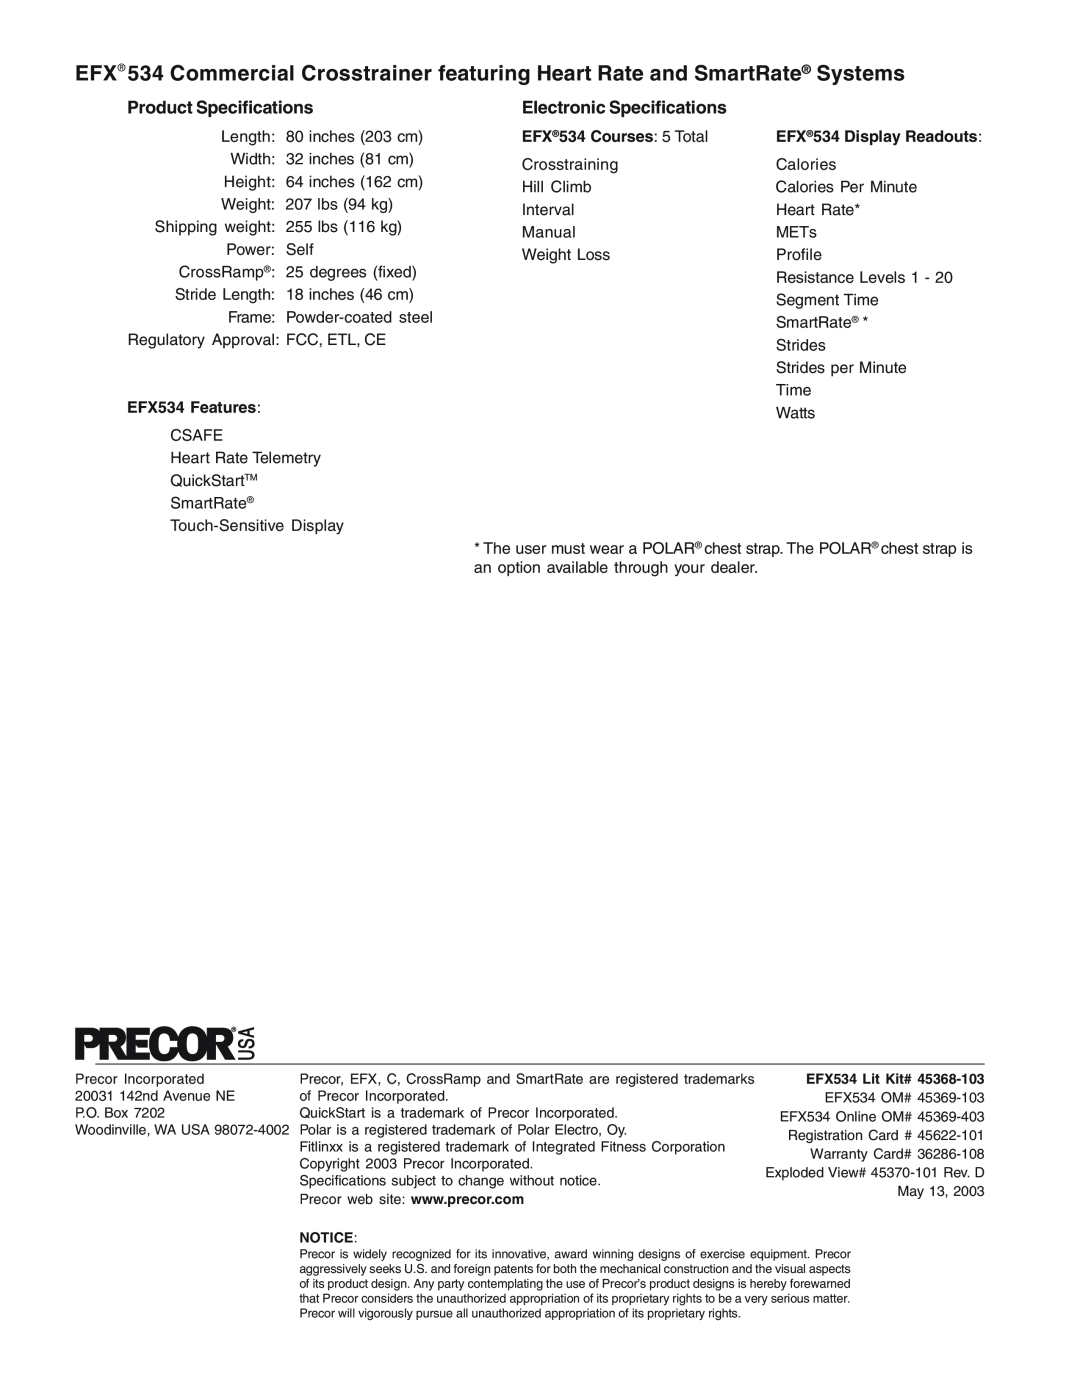 Precor owner manual Product Specifications, Electronic Specifications, EFX534 Features, EFX534 Courses 5 Total 